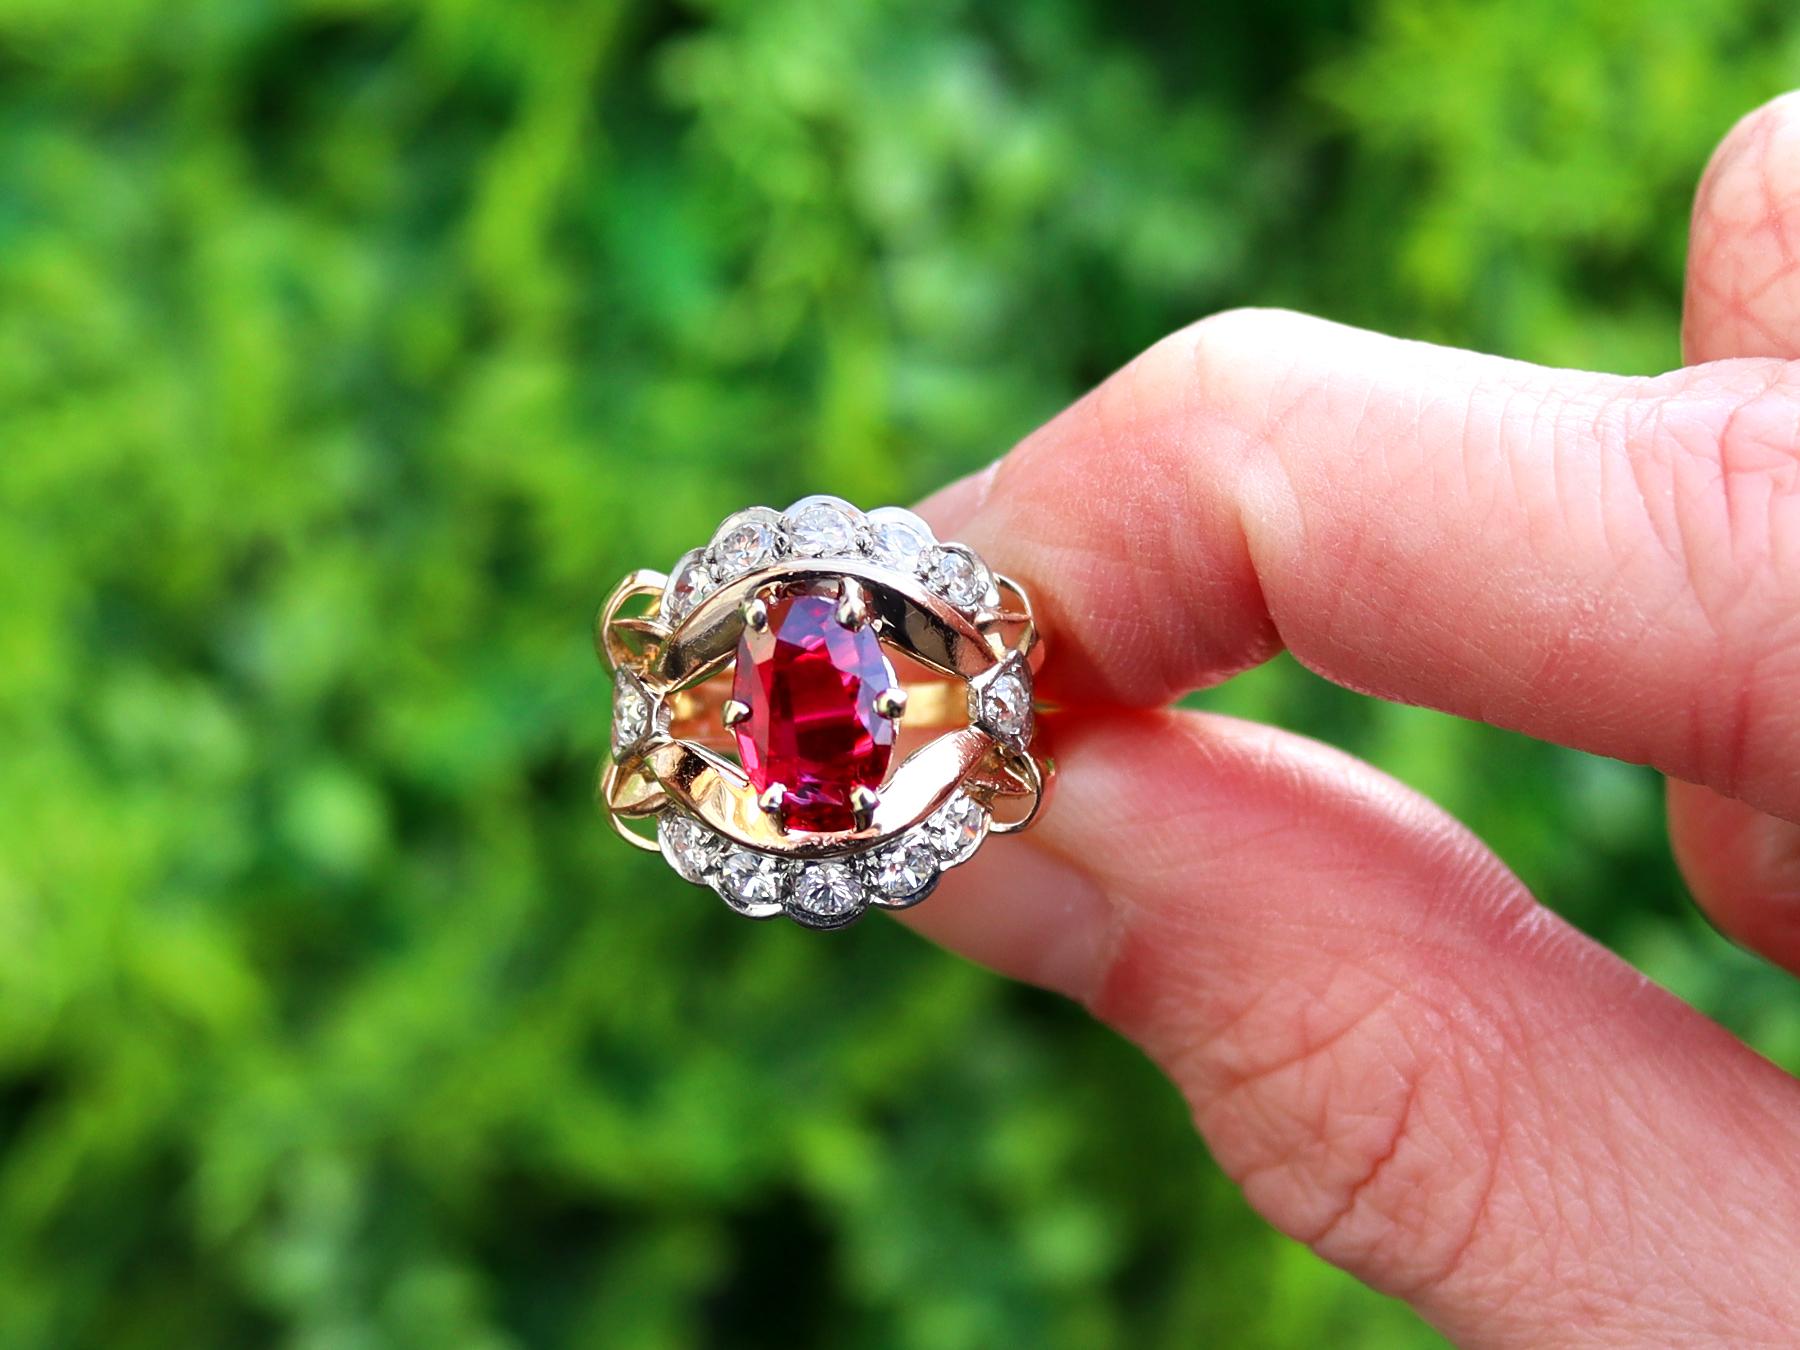 A stunning, fine and impressive vintage 1.80 carat Thai ruby and 1.12 carat diamond, 18 karat yellow gold and platinum set dress ring; part of our diverse vintage ruby jewellery collections.

This stunning, fine and impressive vintage ruby ring has